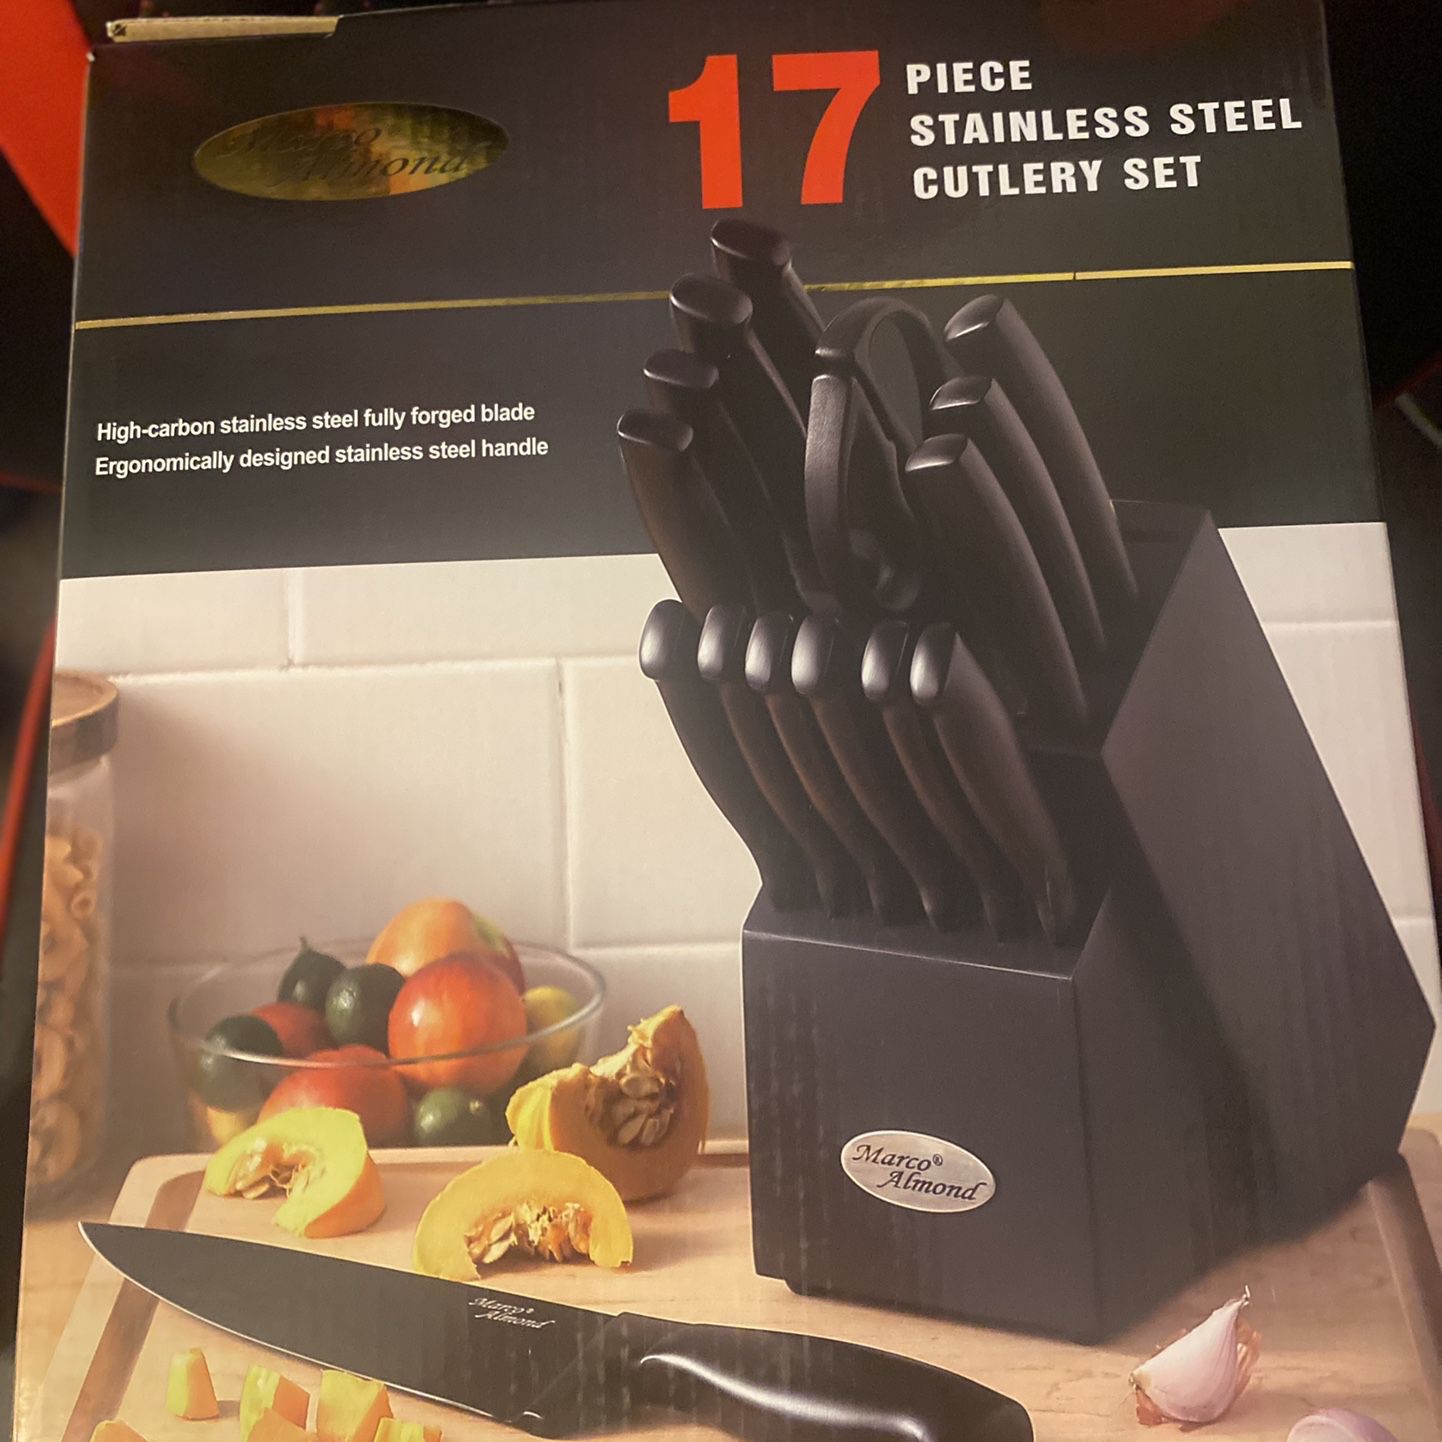 Marco Almond Black Kitchen Knife Set 17pc (Retail 100$) for Sale in  Veterans Adm, CA - OfferUp